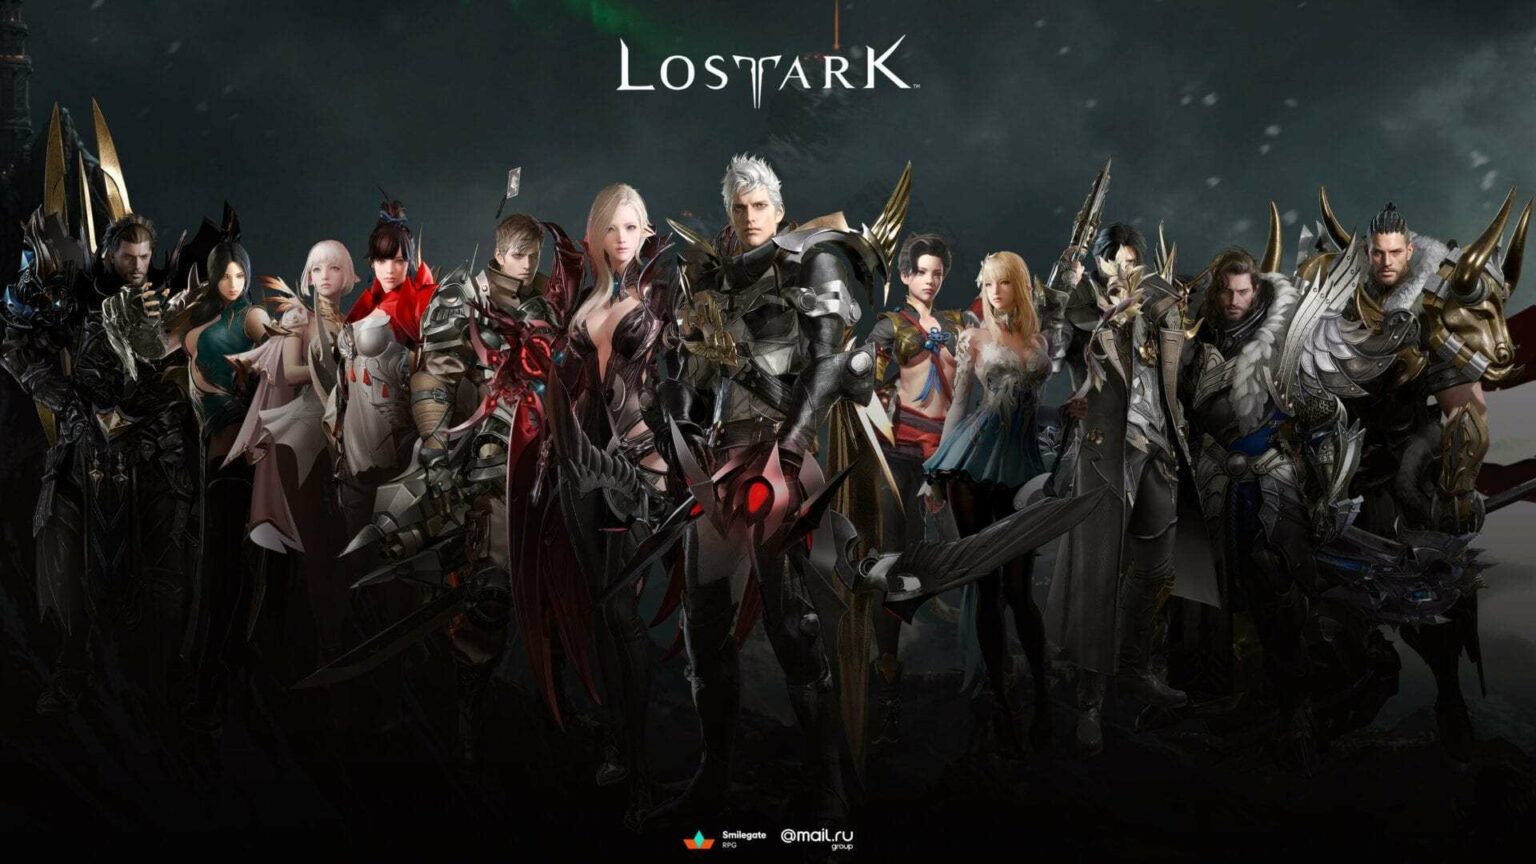 In January, Lost Ark will have a crossover with The Witcher